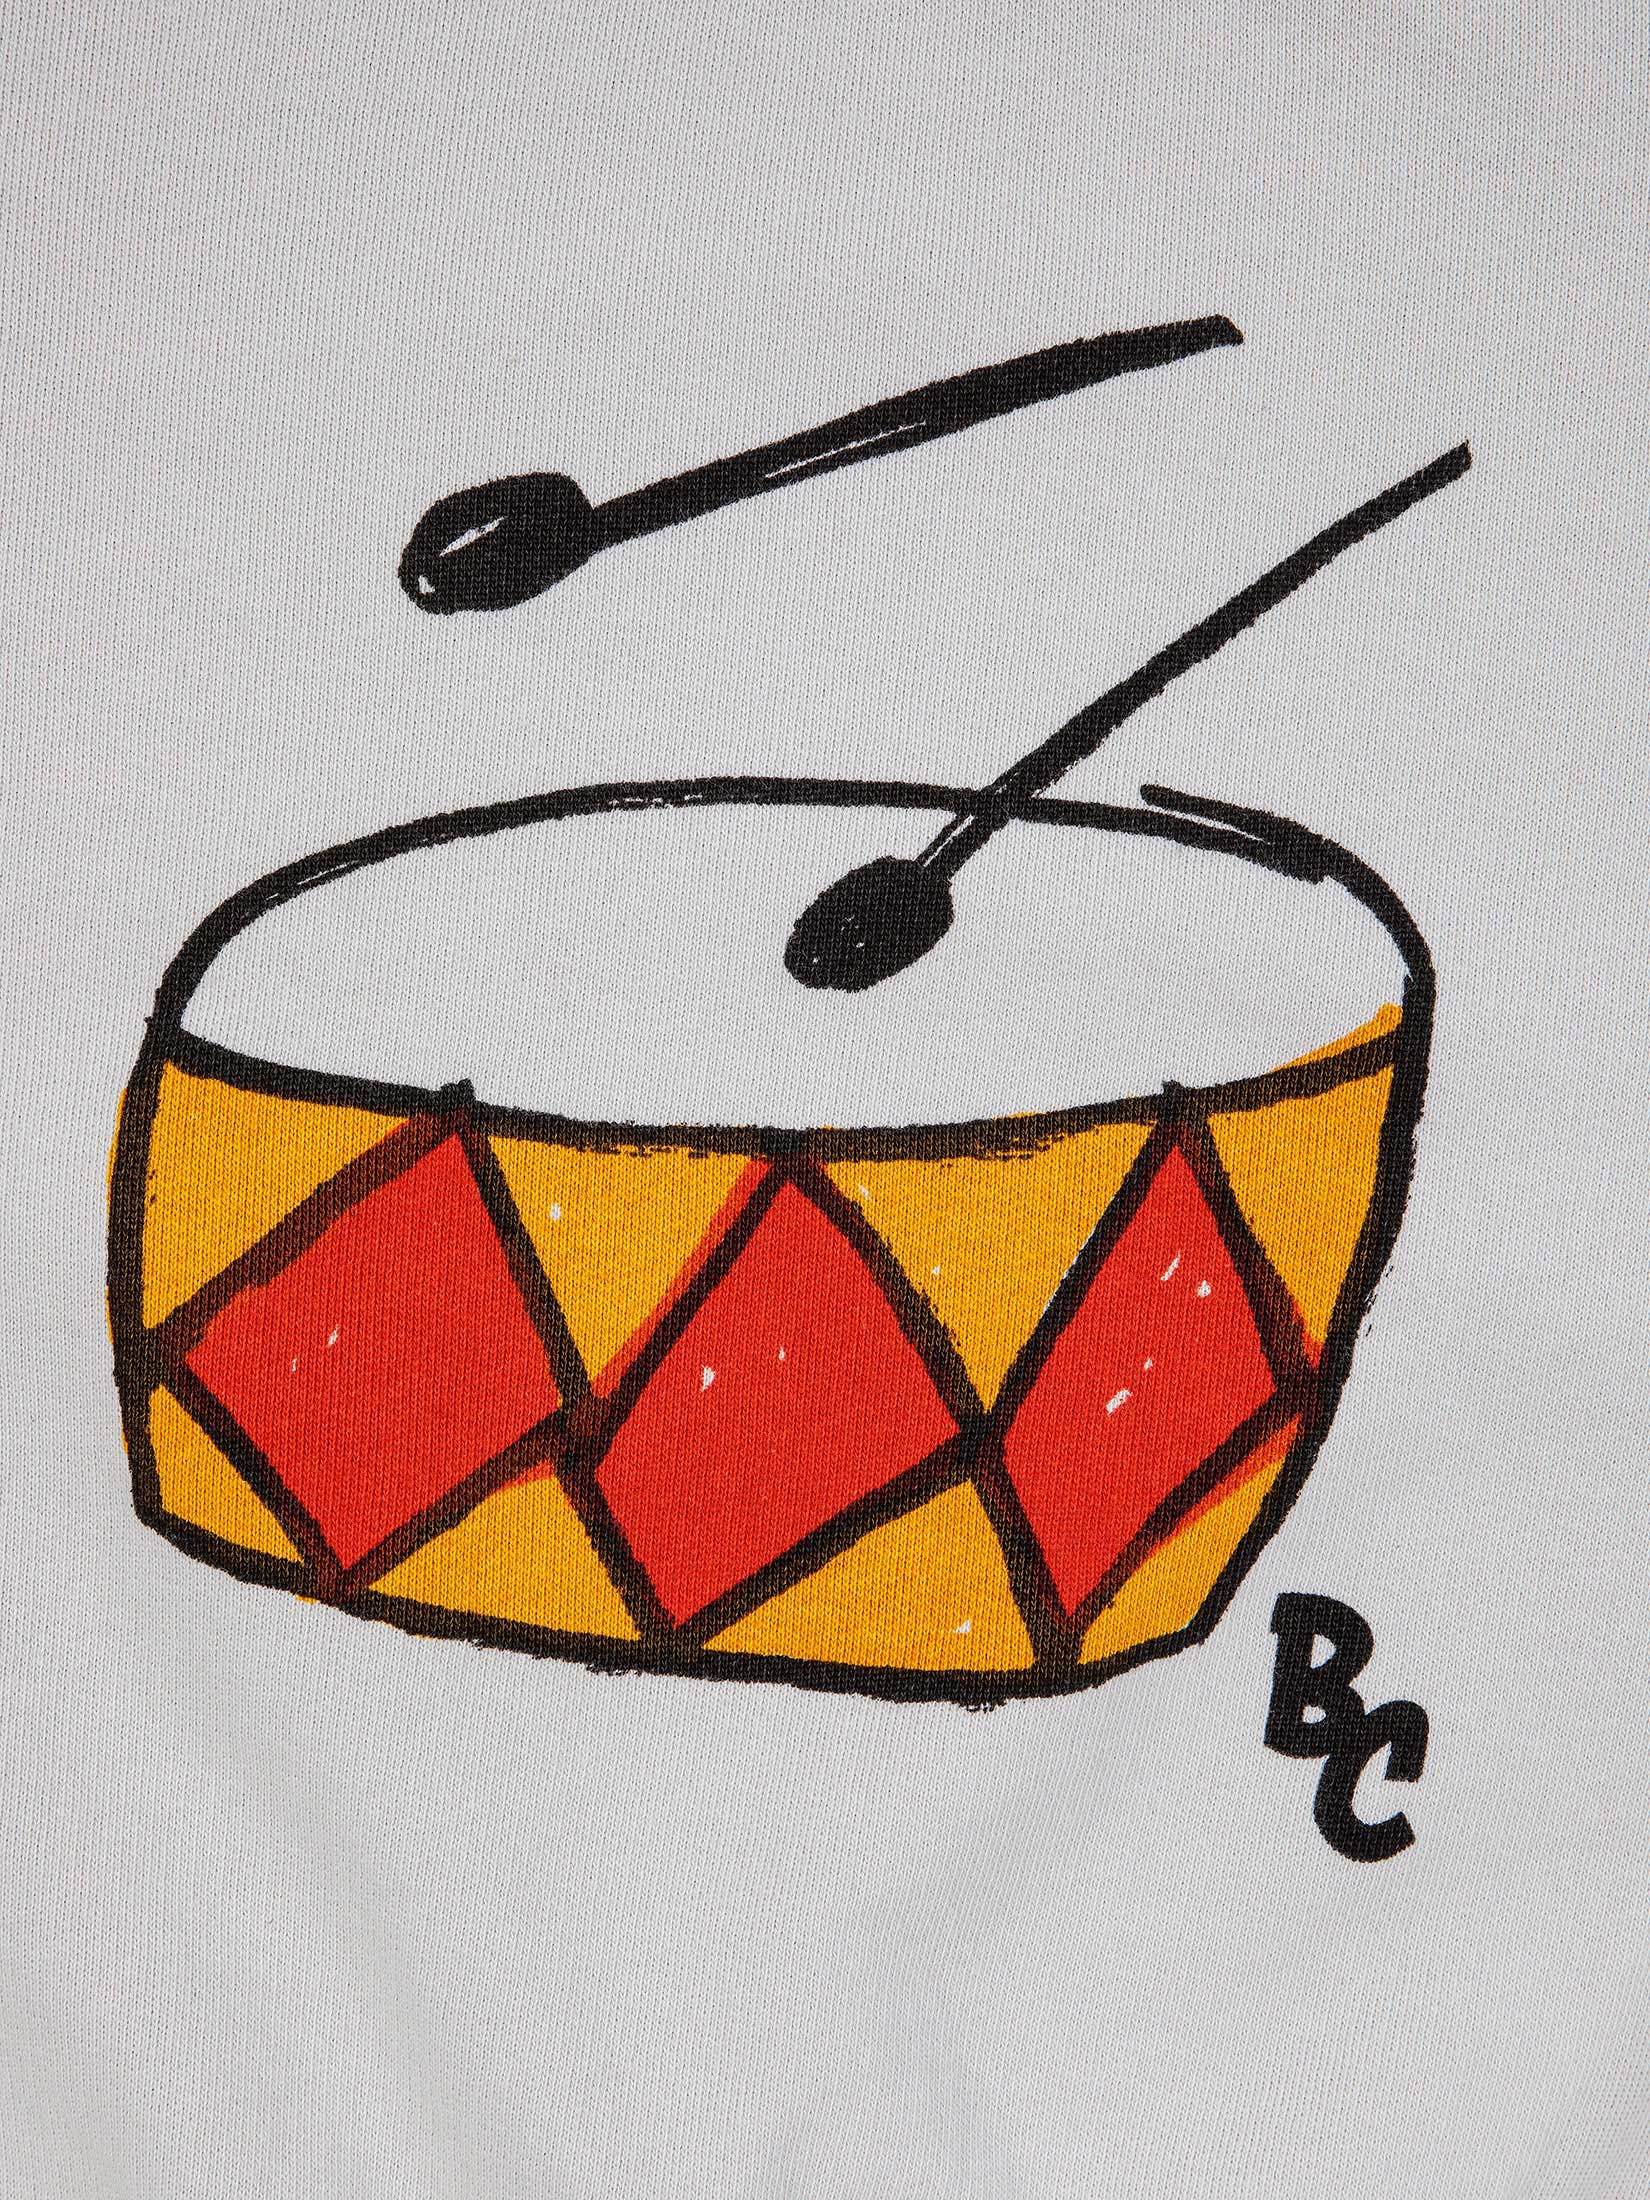 Musical instruments.... Tabla | Art drawings for kids, Basic drawing for  kids, Small drawings